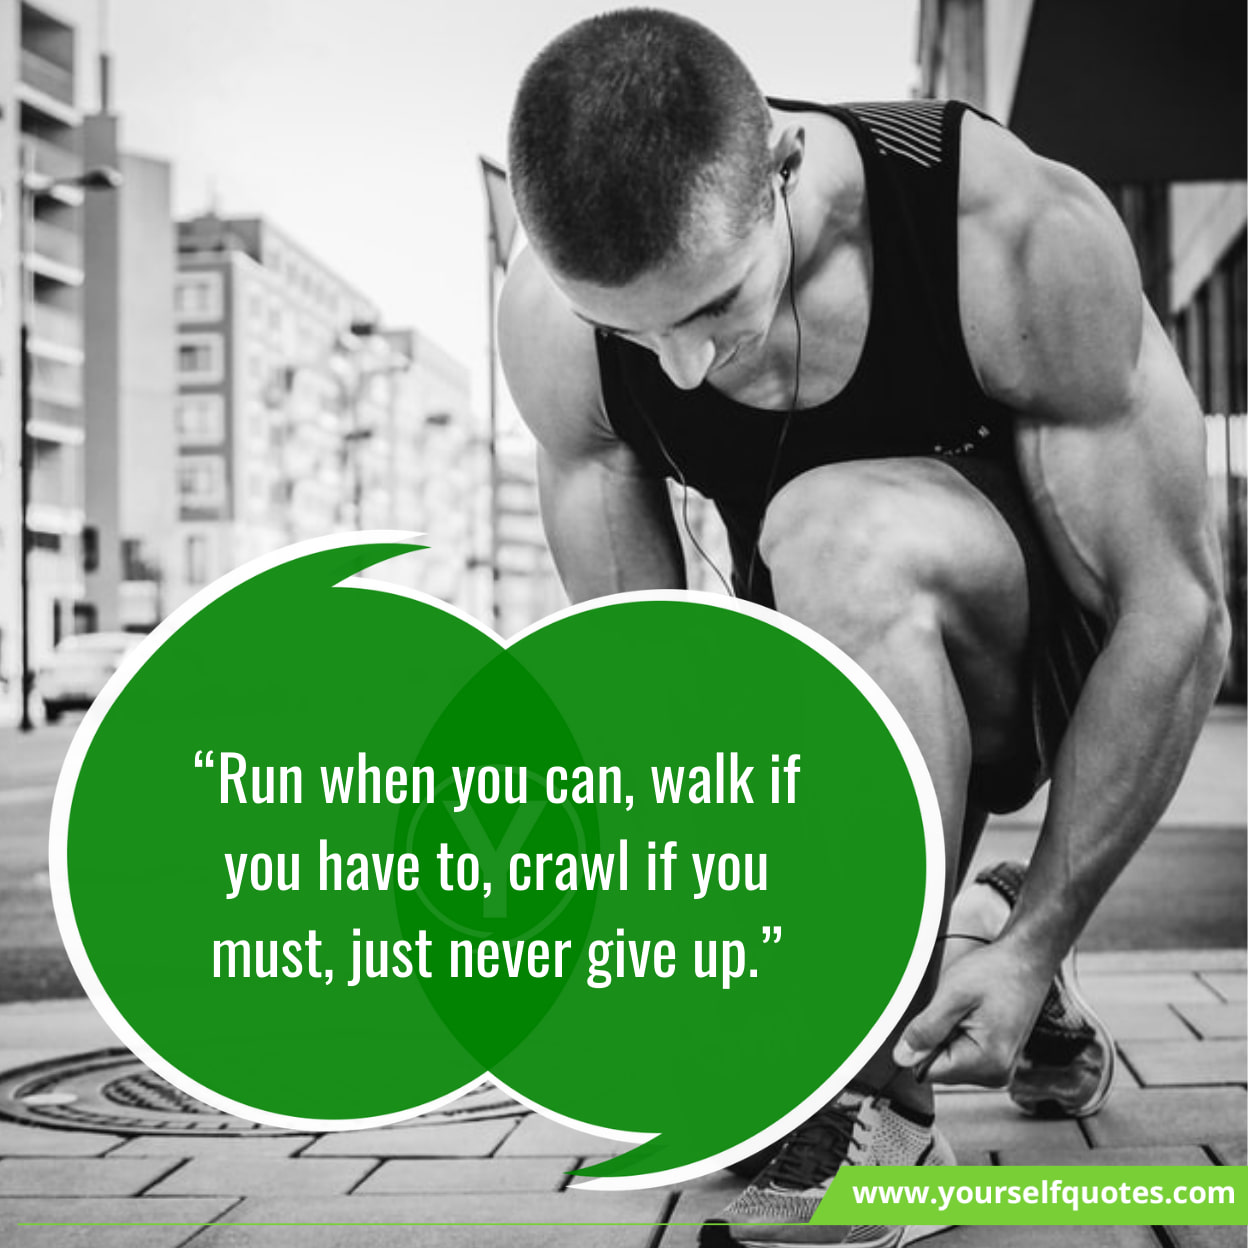 Motivational Quotes for Running